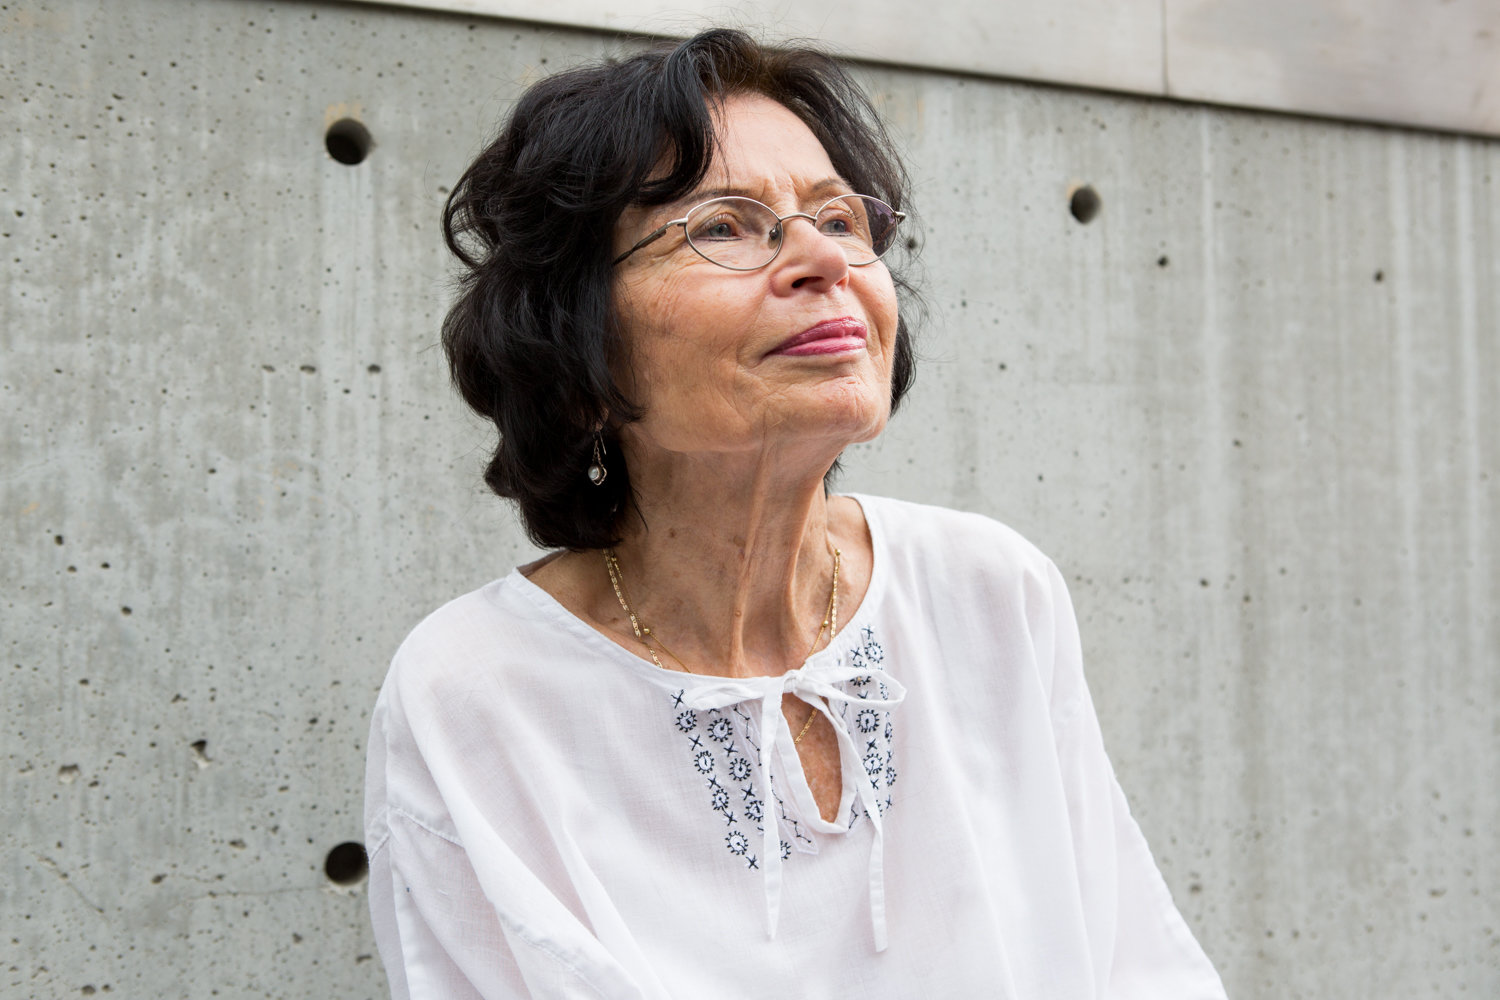 Anneros Valensi was a fixture at the Kingsbridge Library, where she was a member of a writers circle led by Meriam Helbok. She died April 29 at 81.